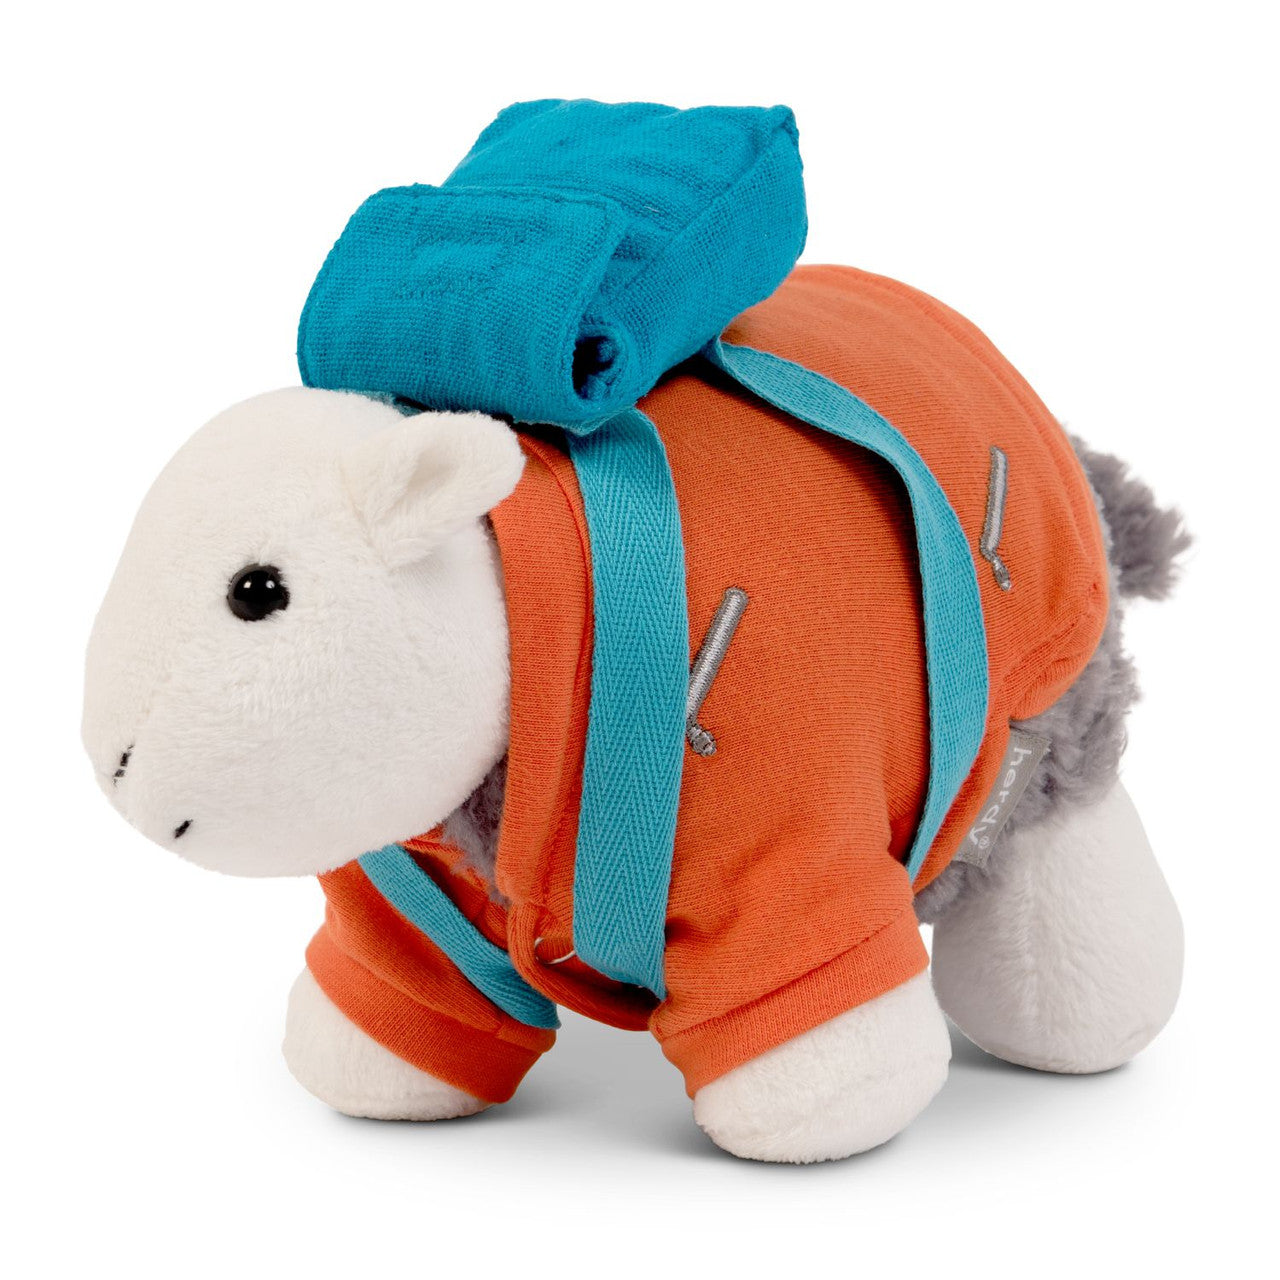 Little Herdy Hiker Outfit